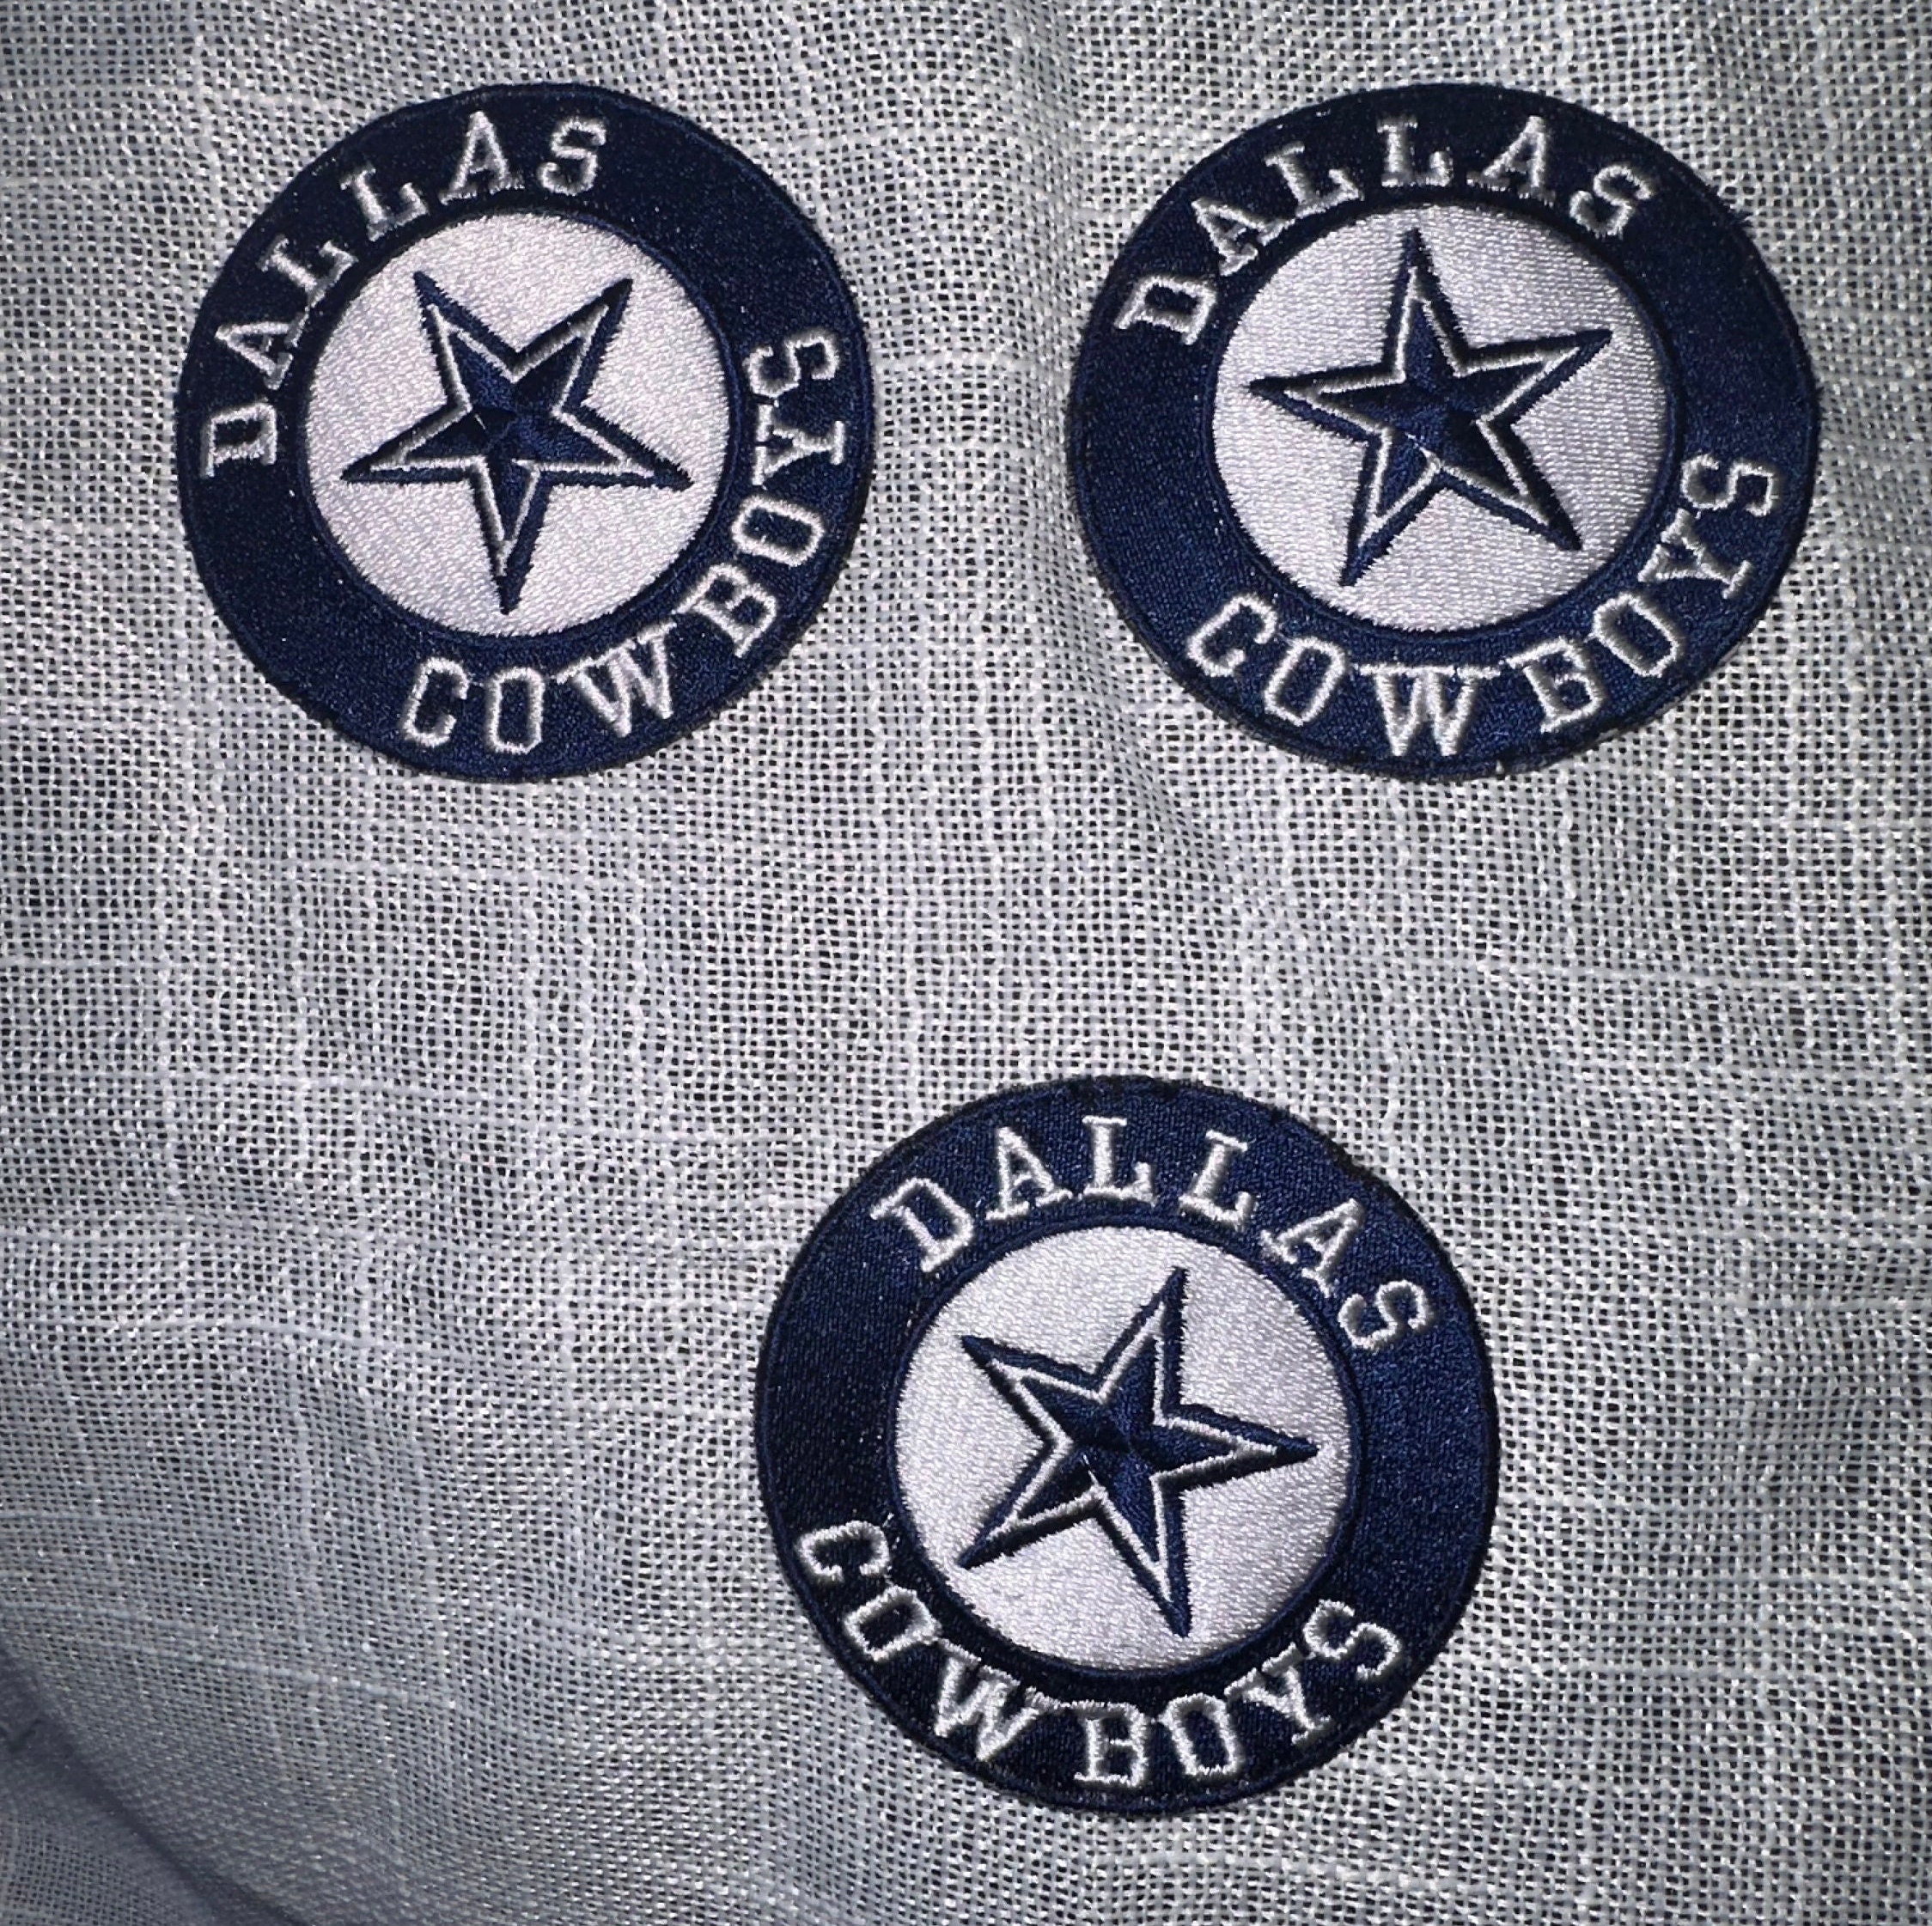 Dallas Cowboys Iron On Patches - Beyond Vision Mall